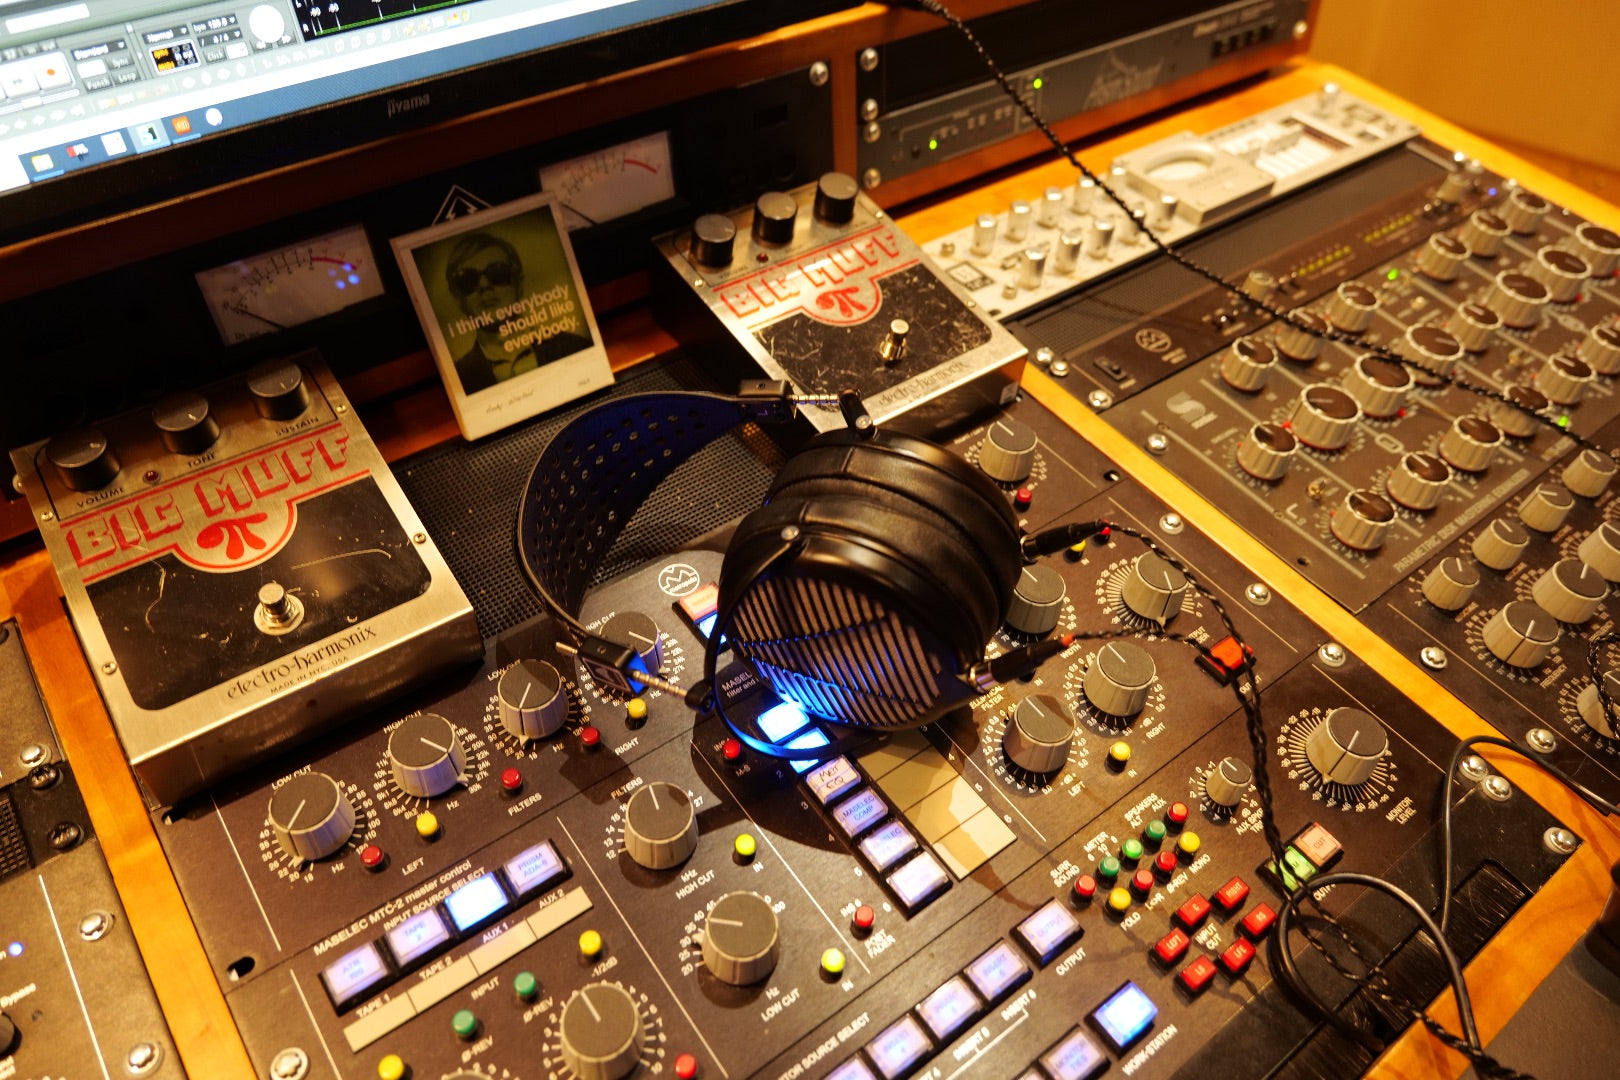 Audeze LCD-MX4 headphones laying on mixing table